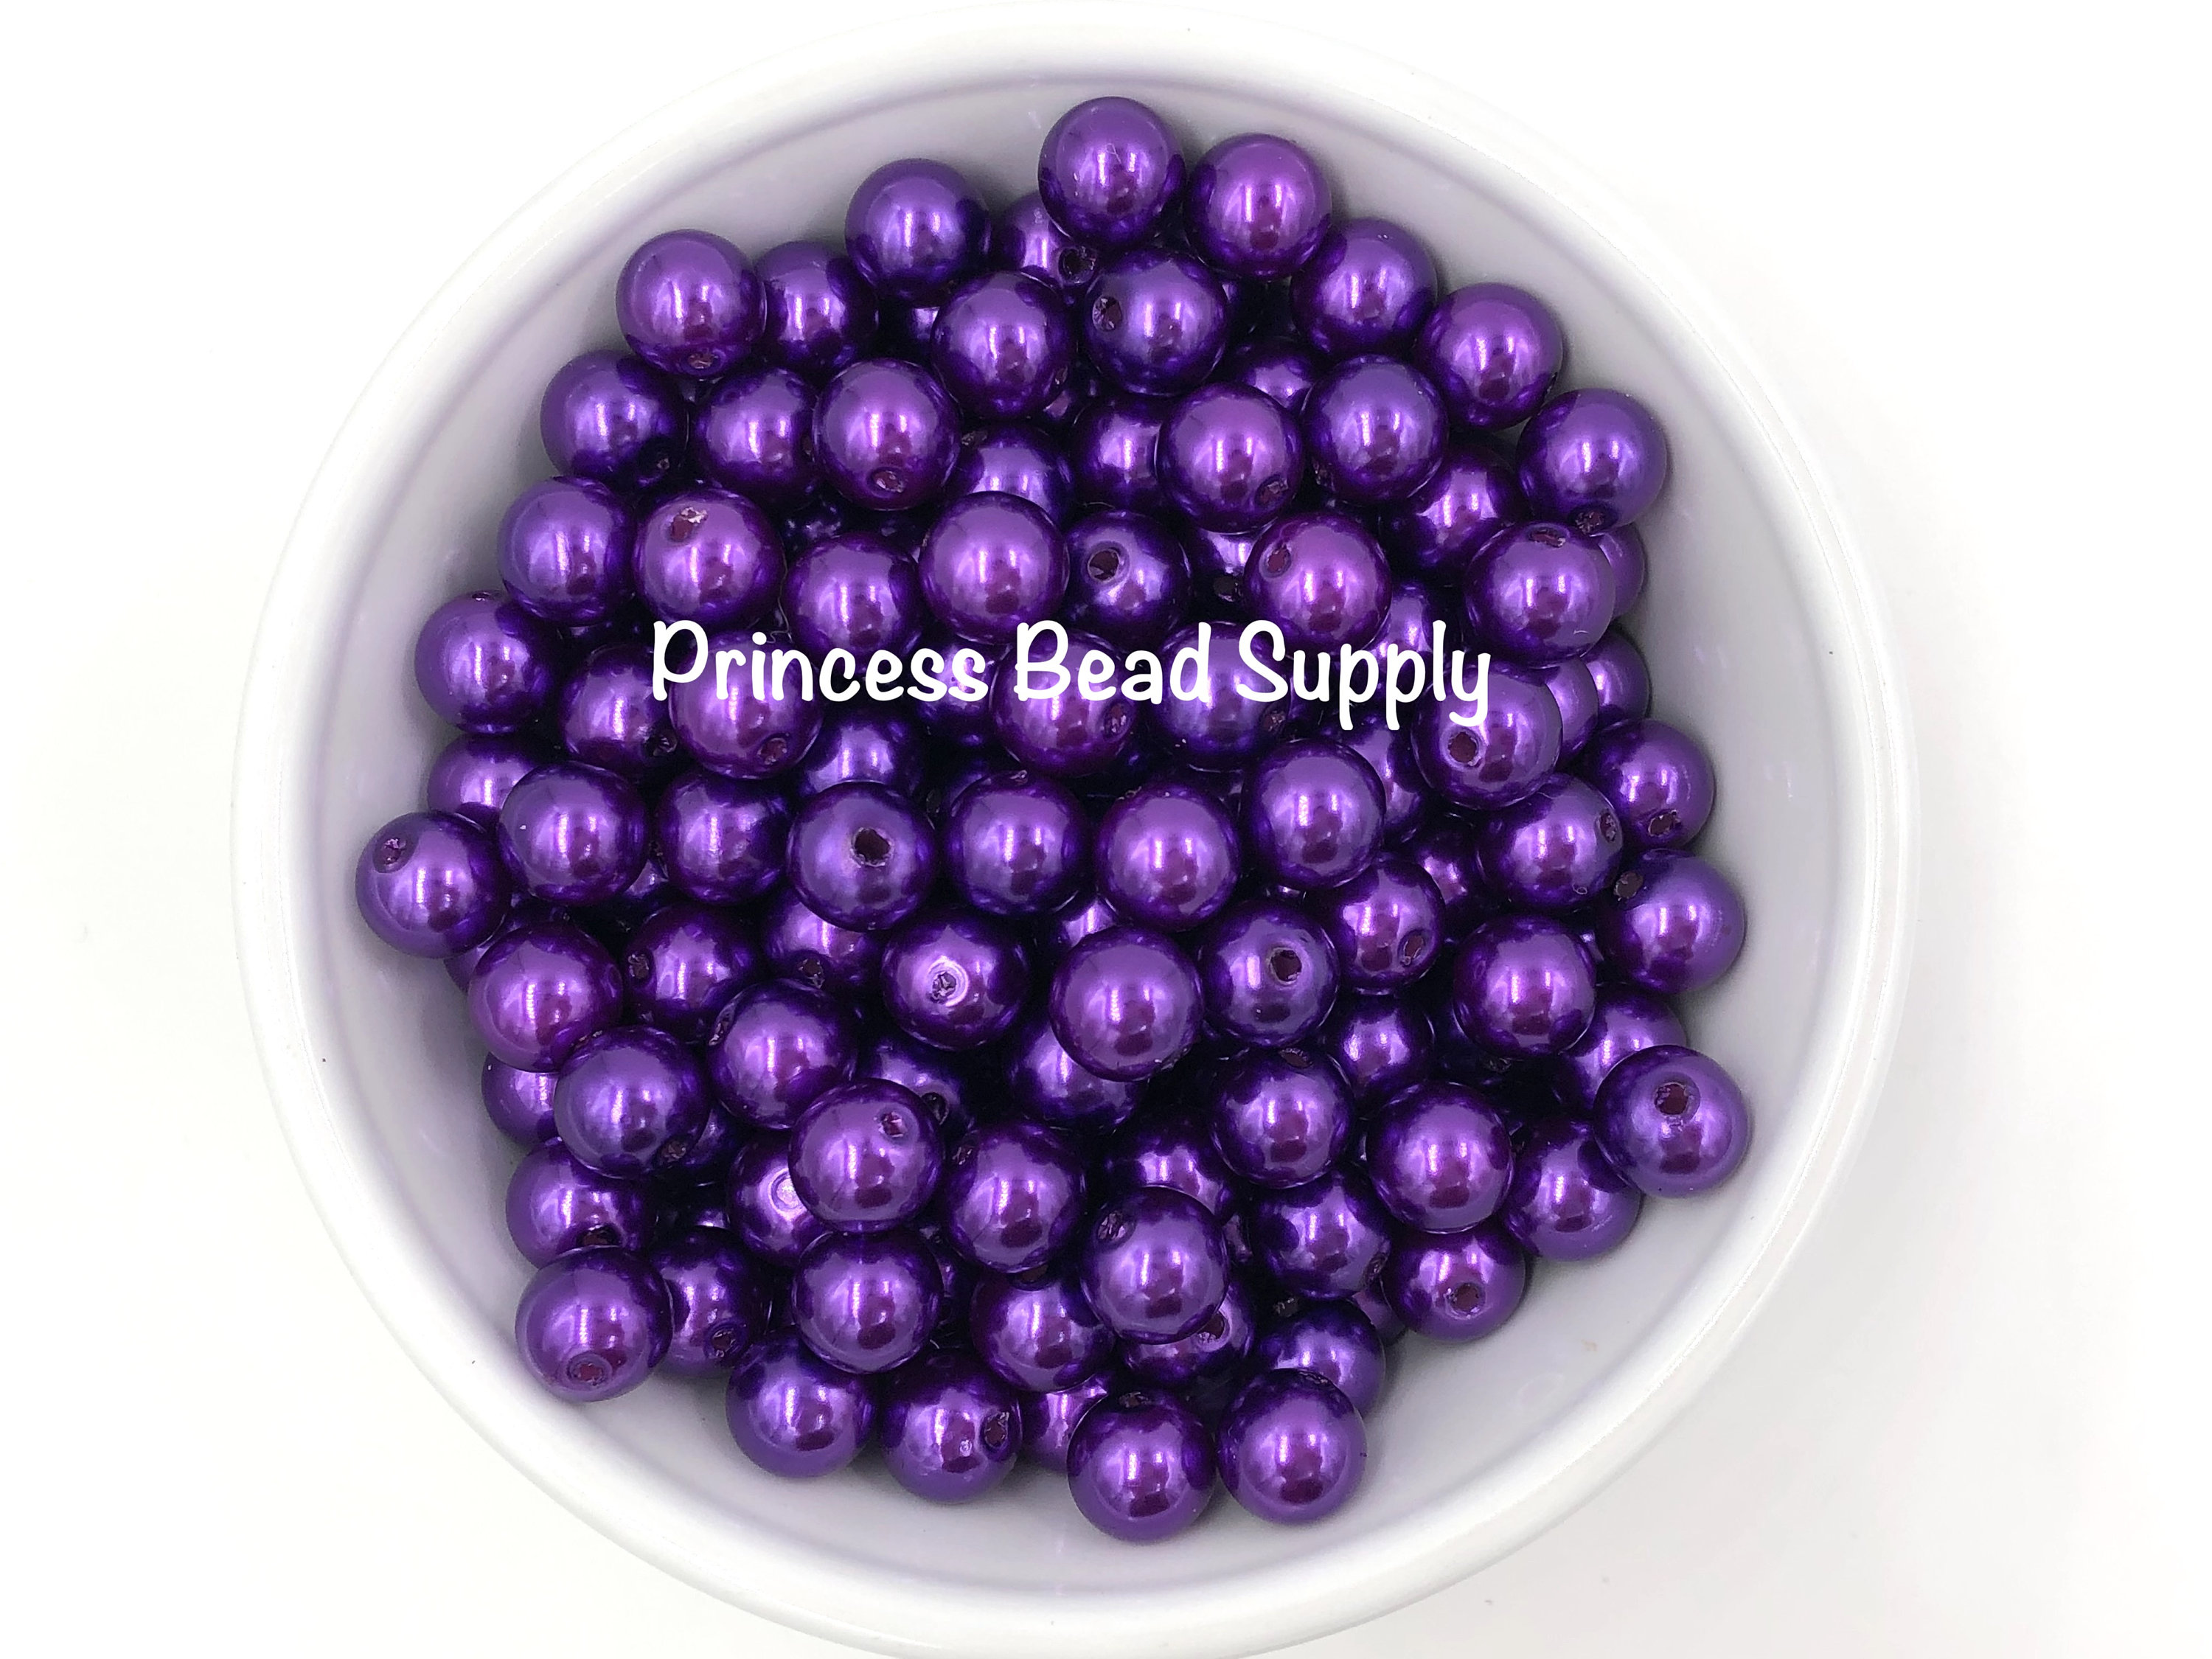  PATIKIL 10mm Acrylic Beads for Jewelry Making, 100 Pack Faceted  Acrylic Round Beads Spacer Beads for Bracelets Earring Necklace DIY Craft  Style 2, Mix Color : Arts, Crafts & Sewing